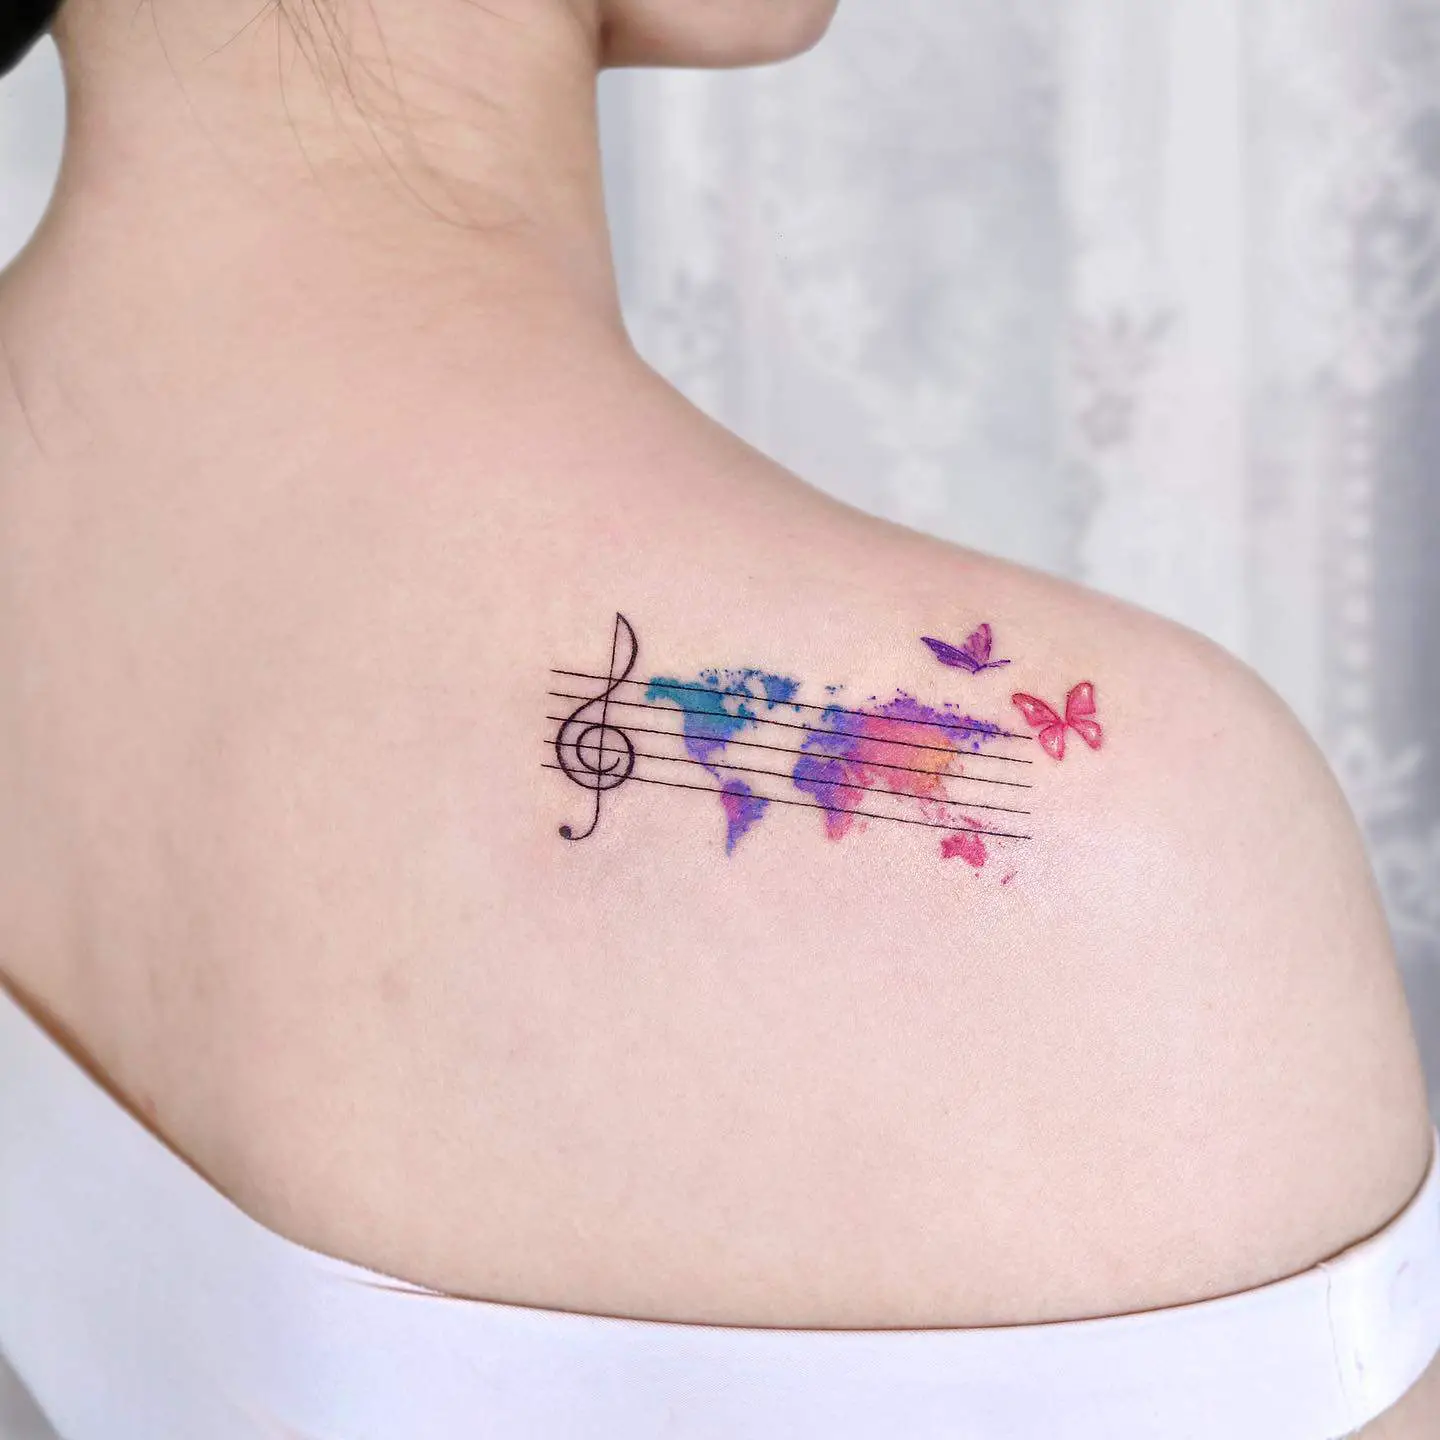 Music tattoo with butterfly by palette.tt